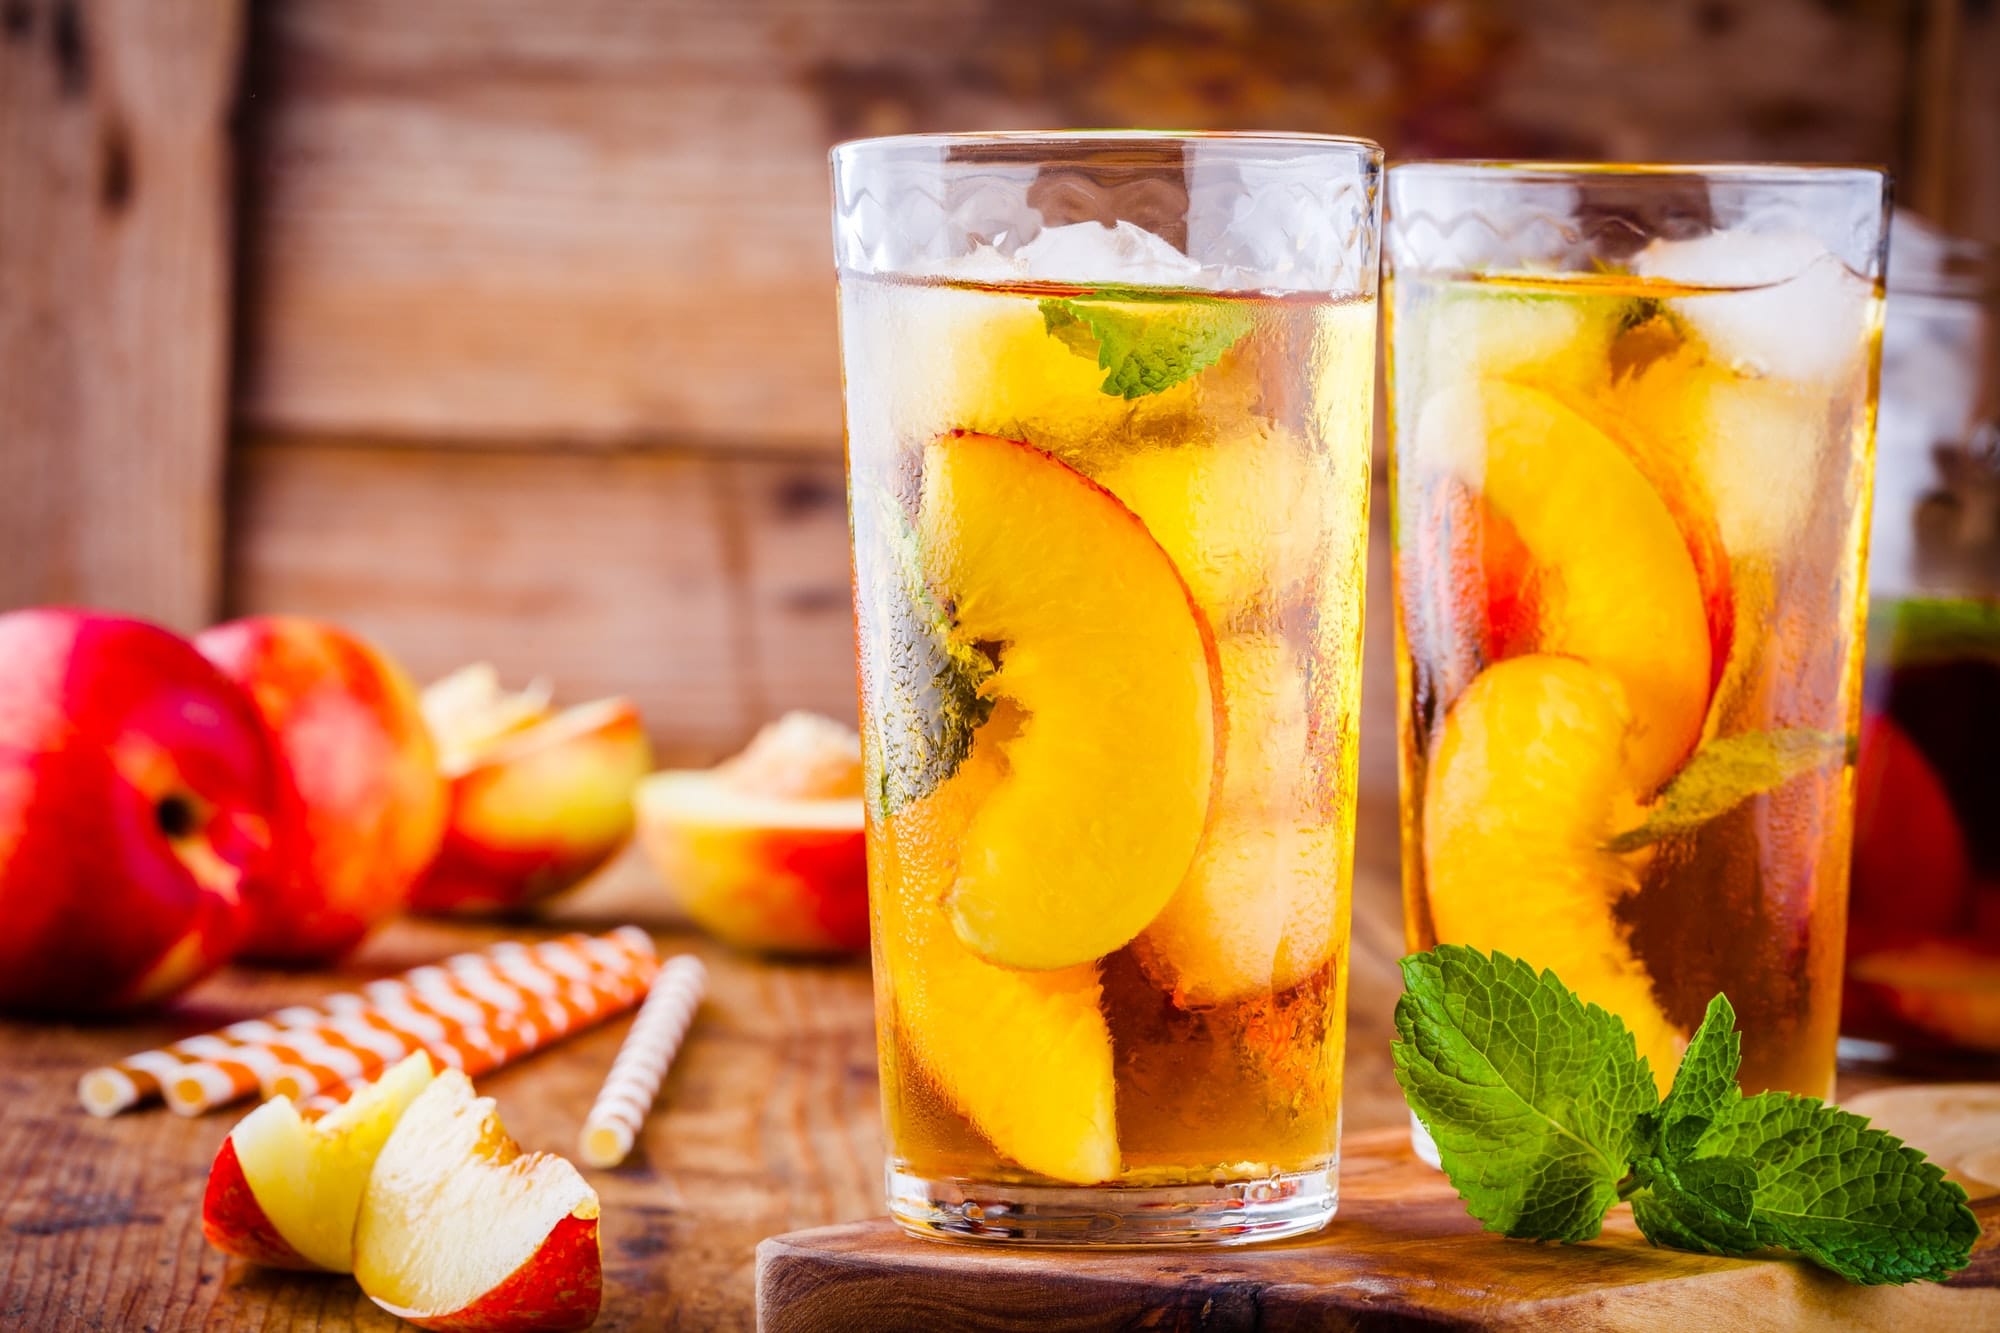 Peach ice tea in a glass with mint